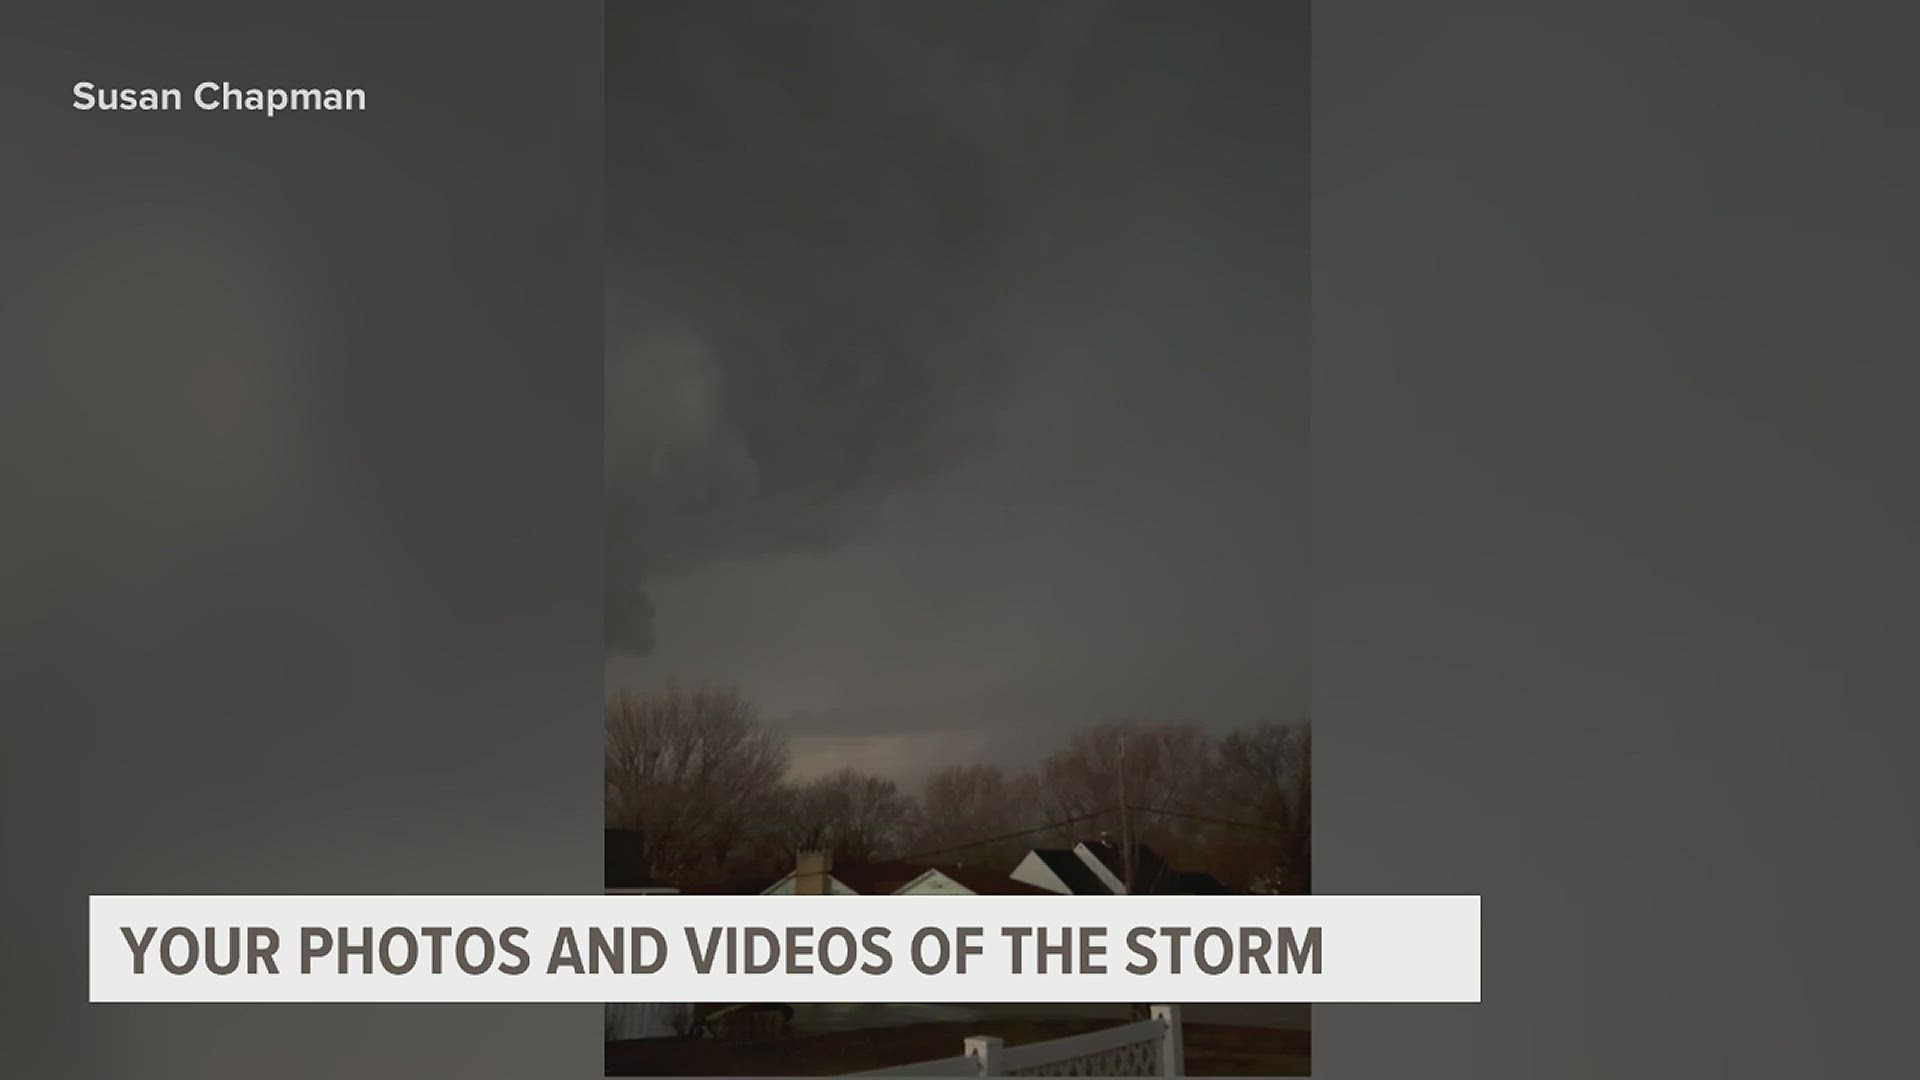 A tornado was confirmed in Henry County during the severe weather.